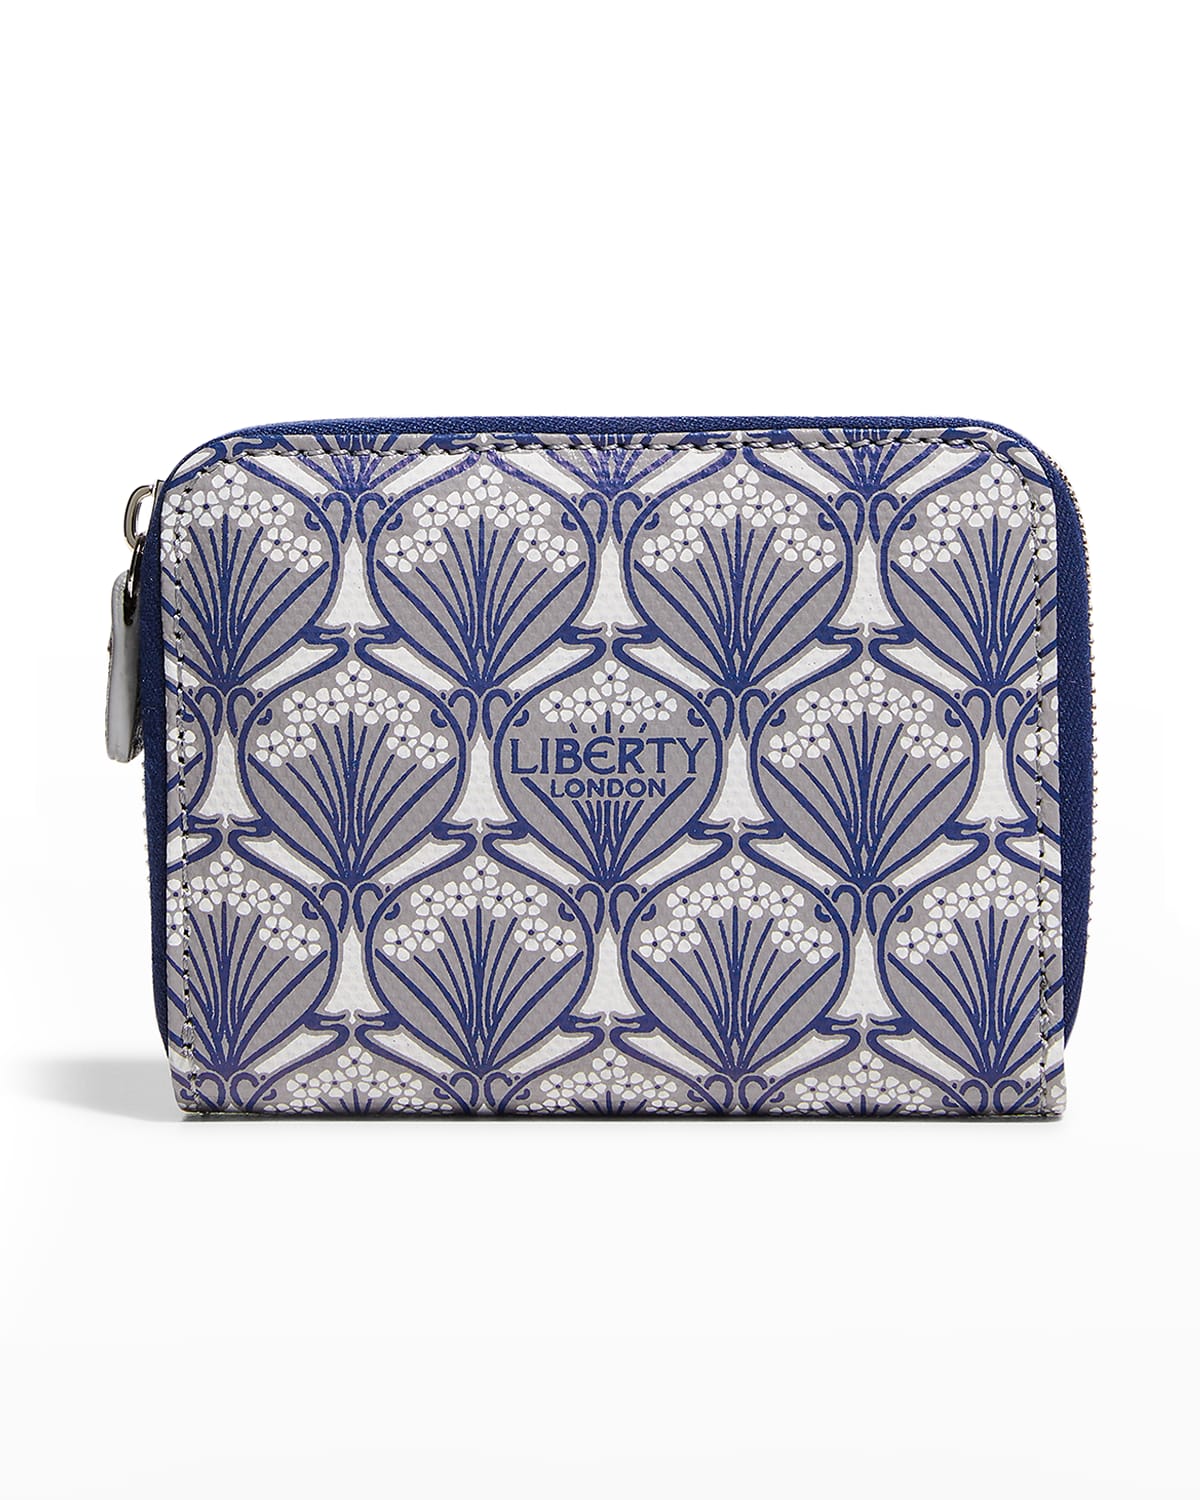 Liberty London Iphis Small Floral-Print Coin Wallet